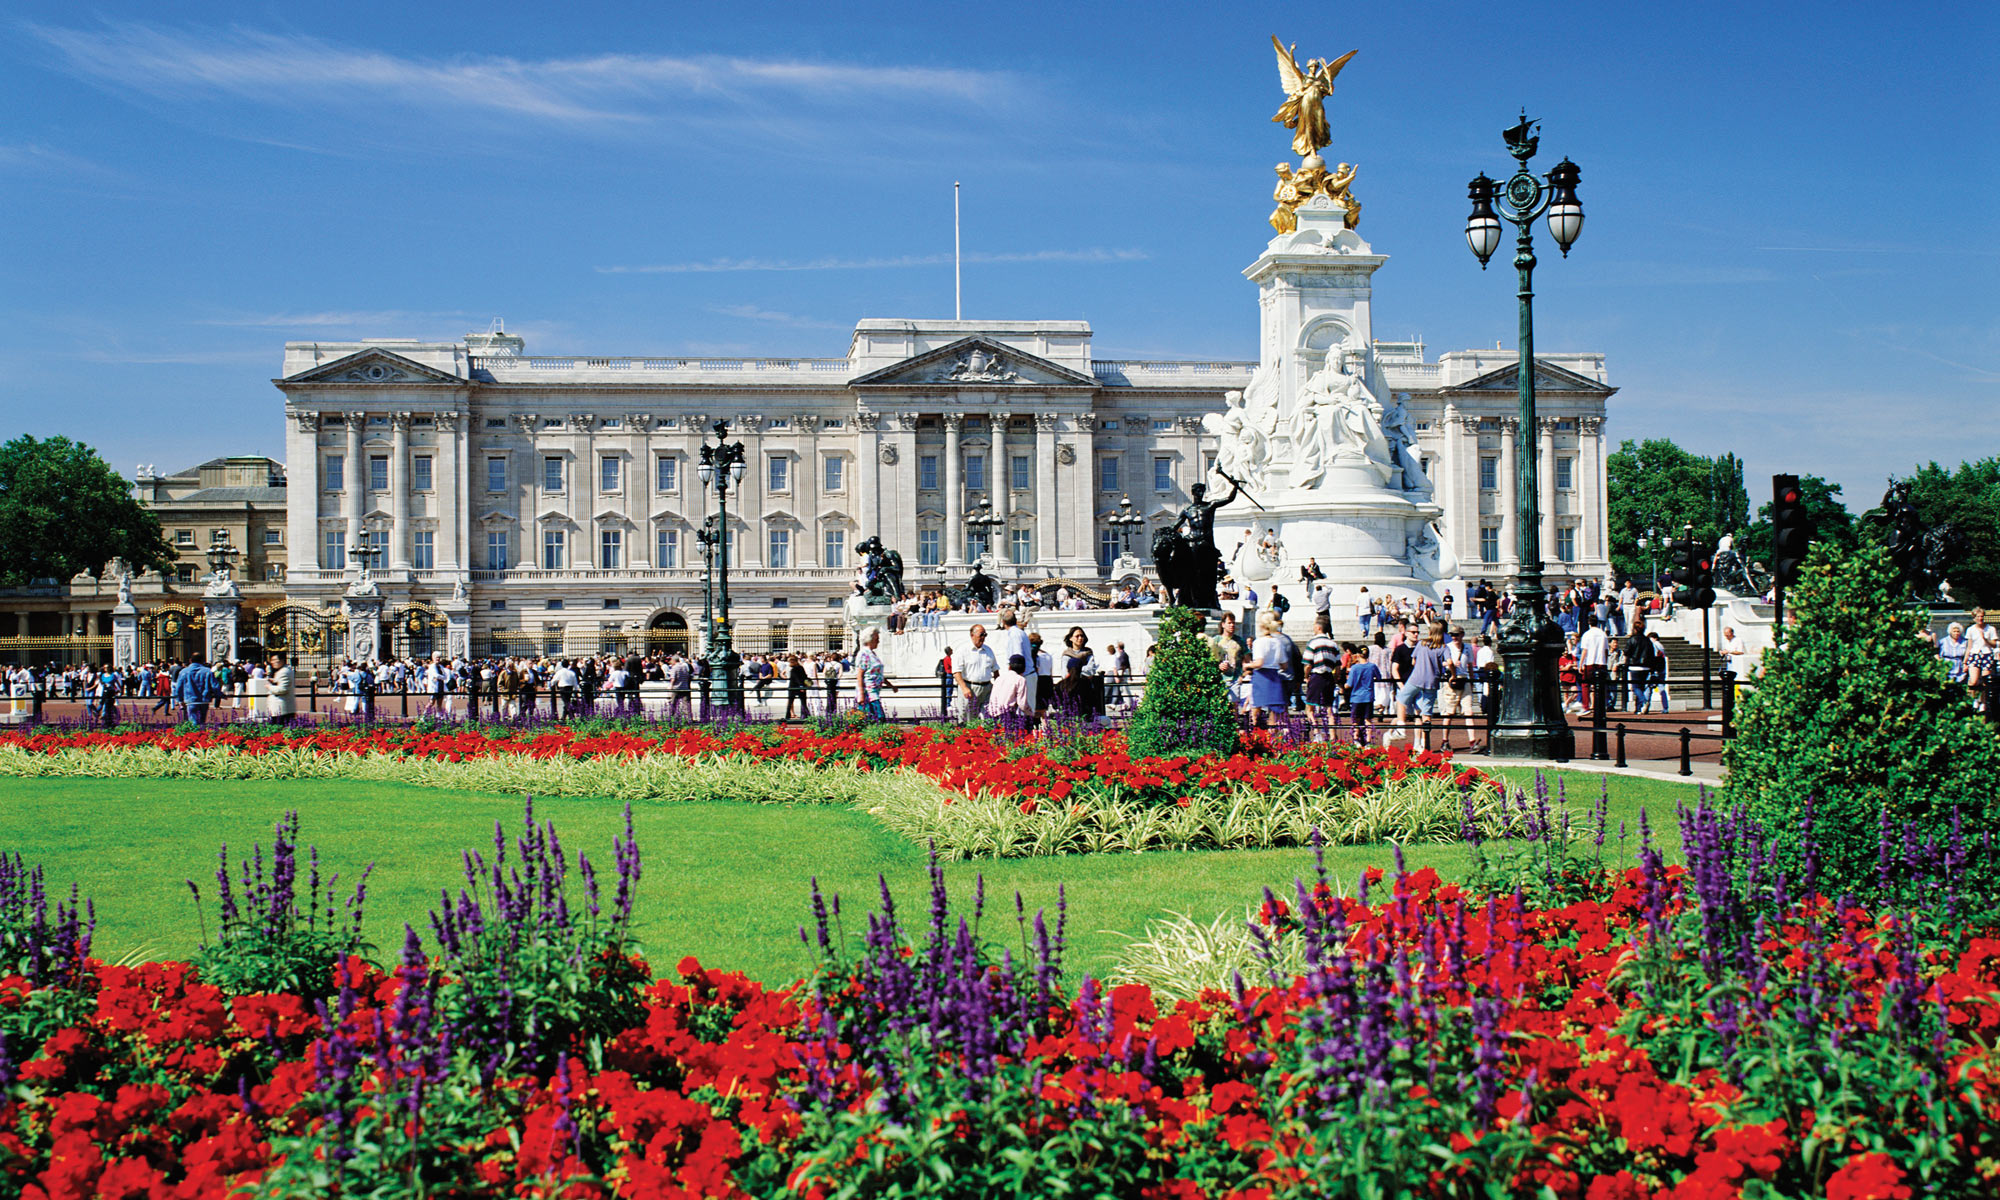 HQ Buckingham Palace Wallpapers | File 732.77Kb